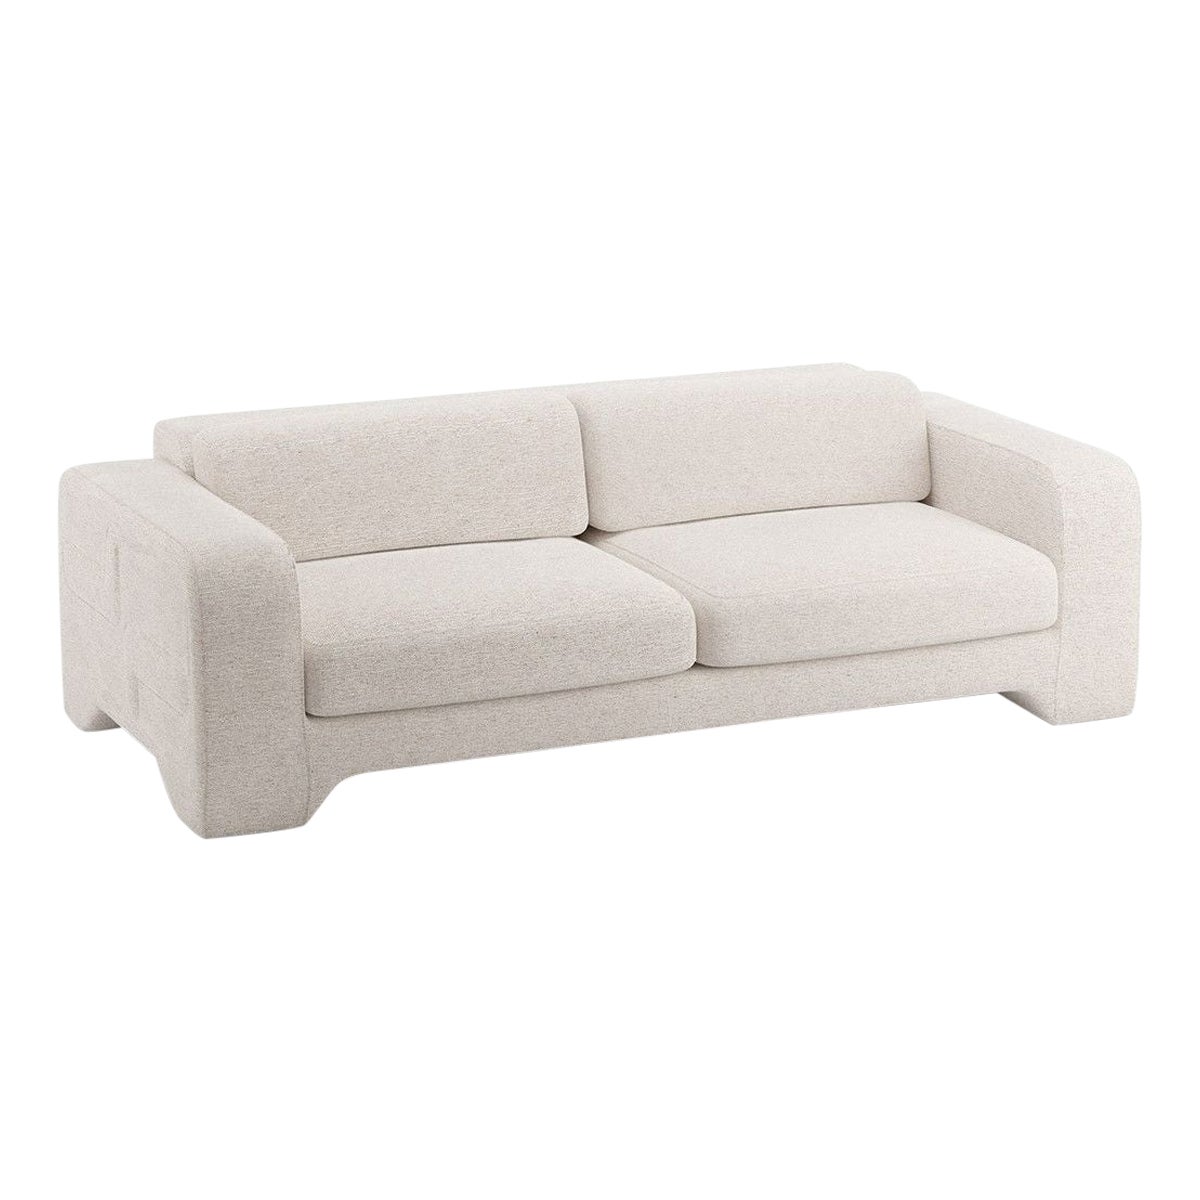 Popus Editions Giovanna 4 Seater Sofa in Otter Megeve Fabric with Knit Effect For Sale